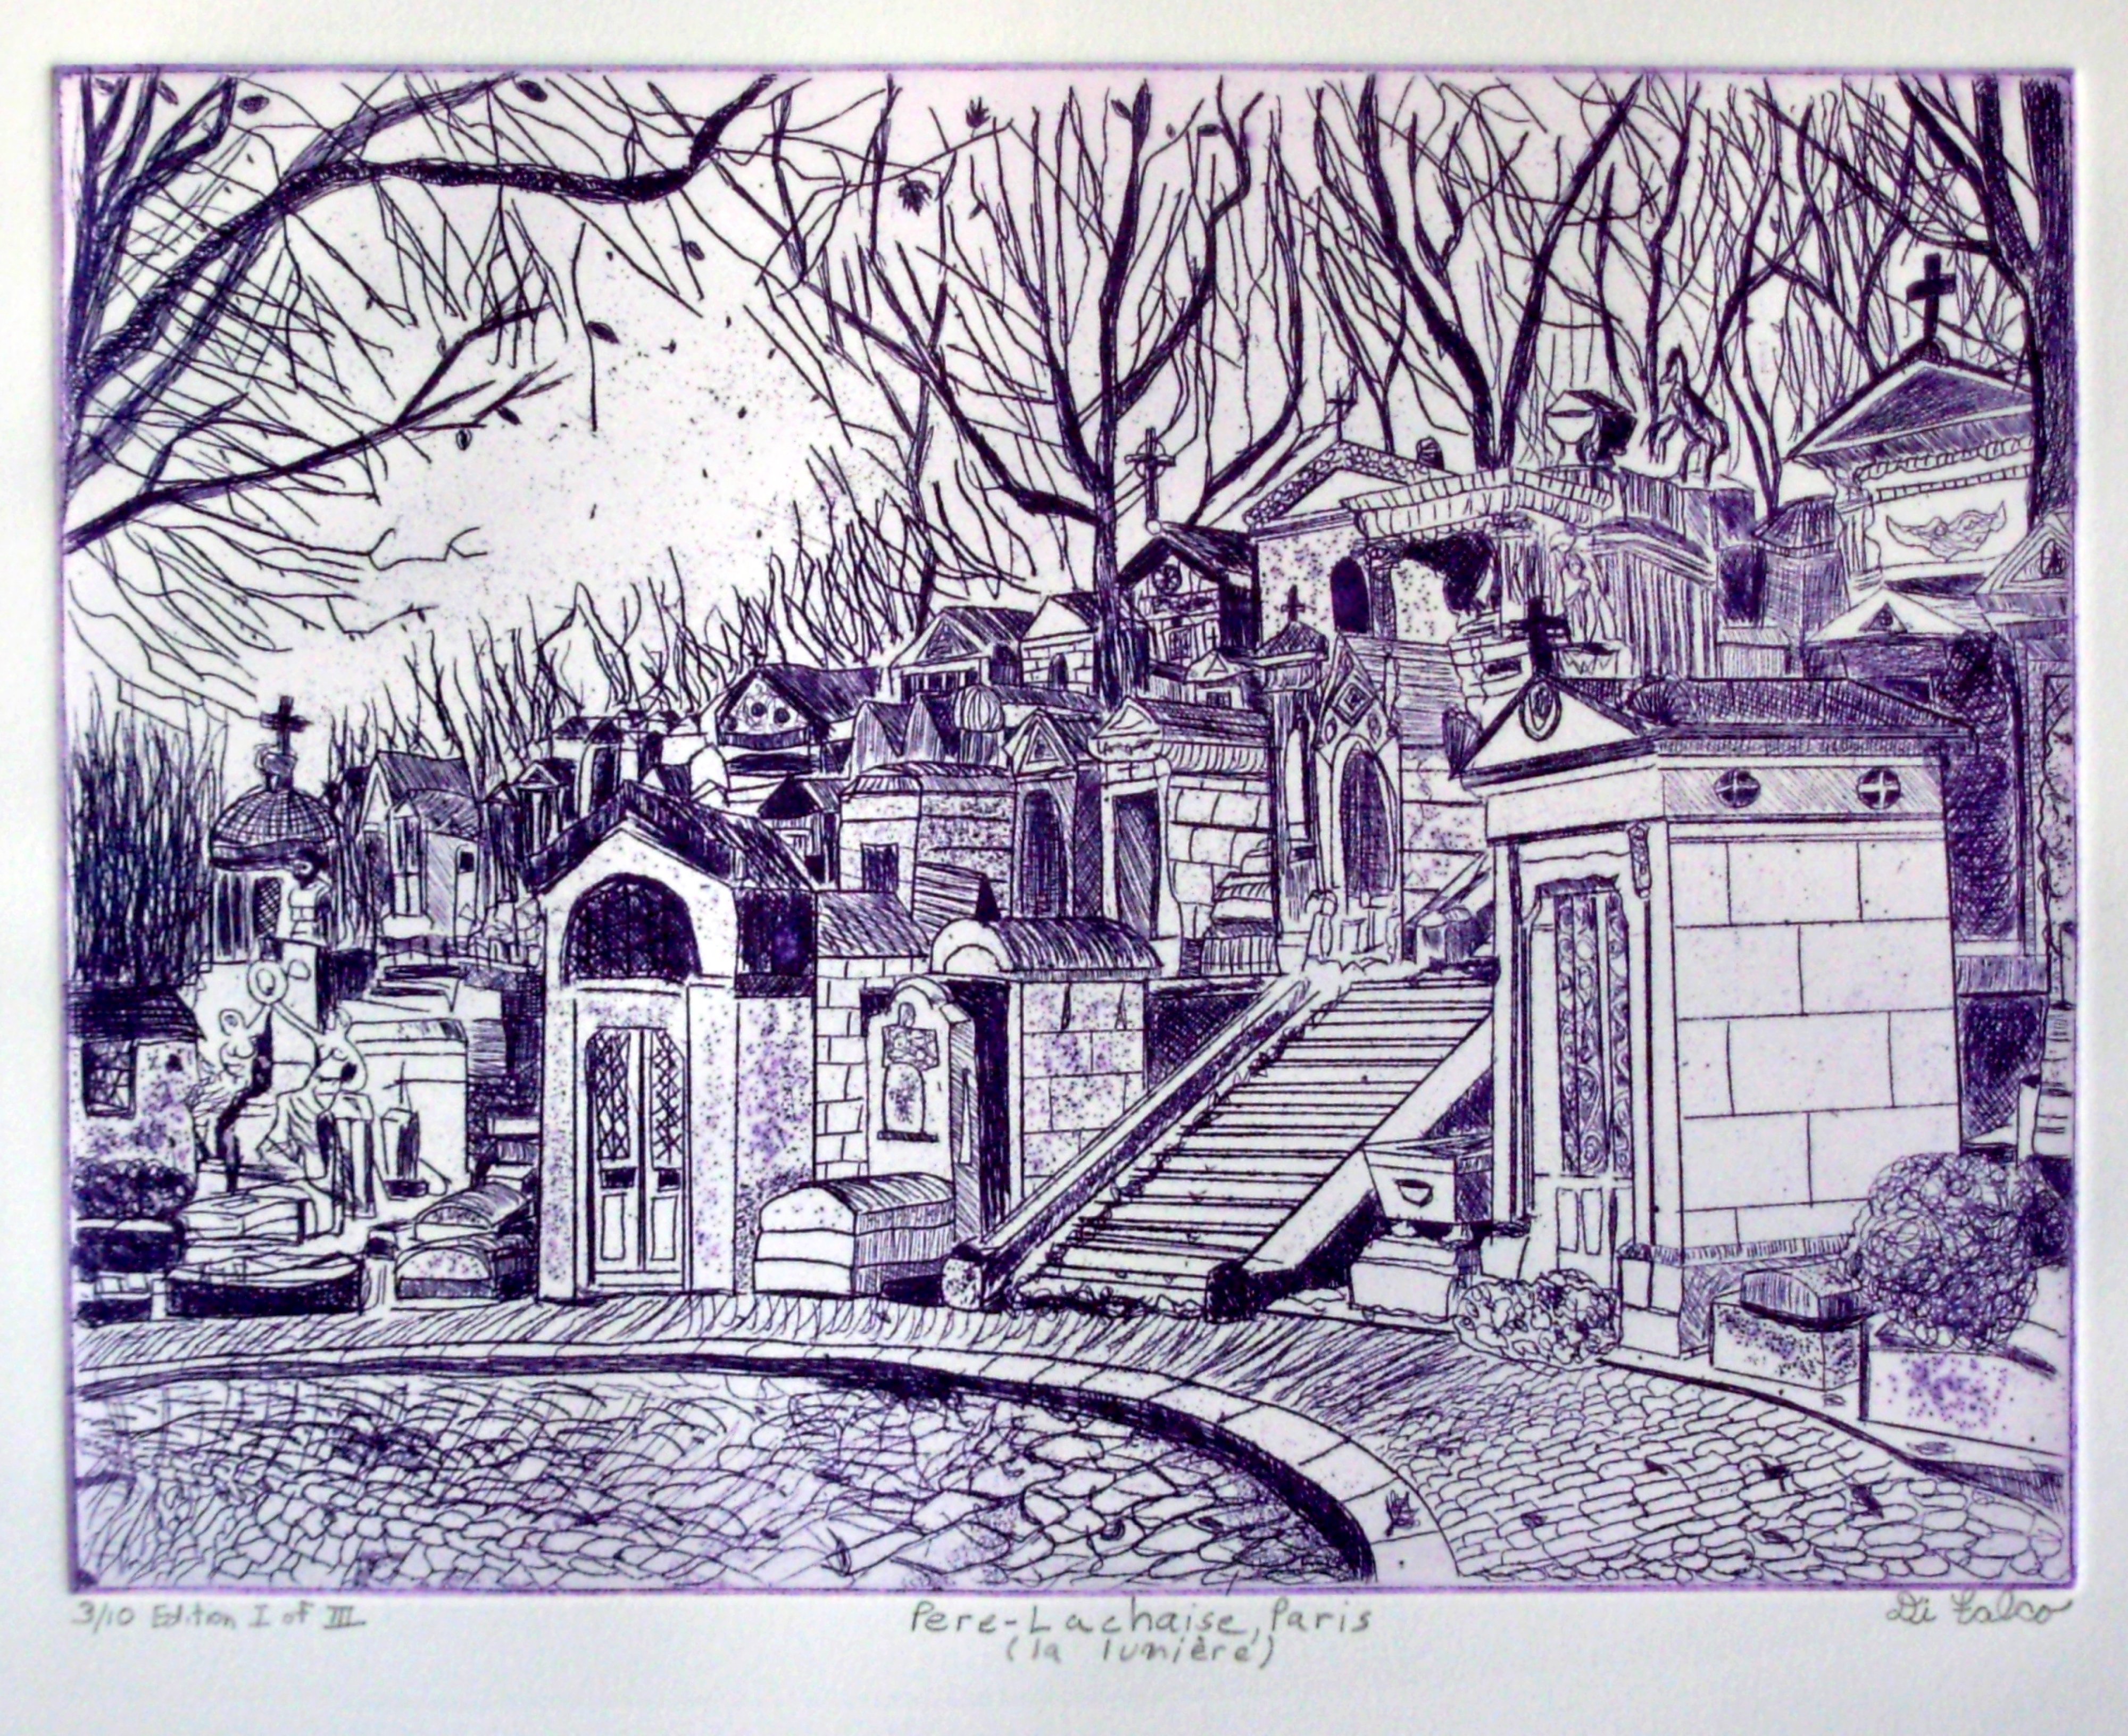 Jerry  Di Falco: 'PERE LACHAISE IN PARIS  ', 2012 Etching, Landmarks. I photographed this Paris scene in 1987 at the Pere Lachaise Cemetery. This etching is from the second edition of ten, which uses an oil base ink blend, Charbonnel brand, on RivesBFK white printmaking paper. My studio techniques included intaglio, mezzotint, and aquatint. The image size measures 9 inches high ...